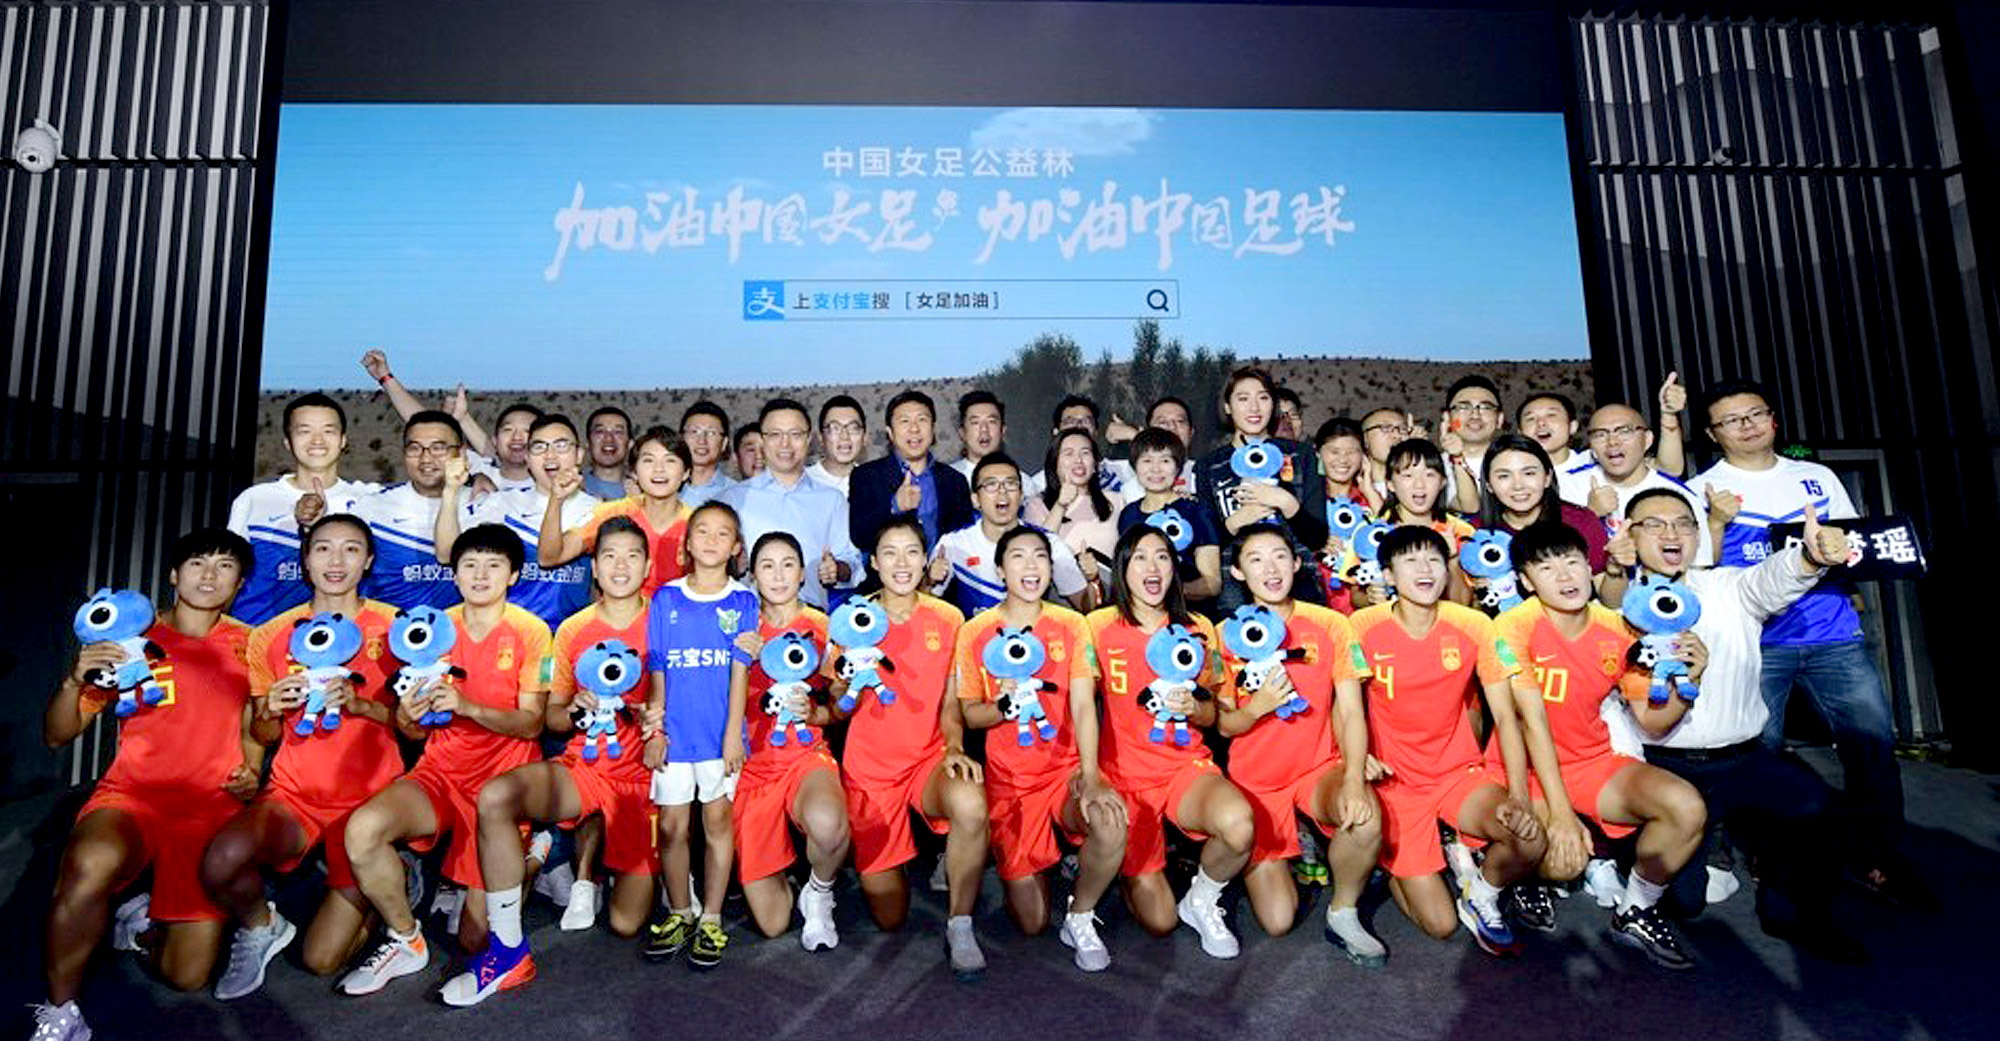 Alipay Unveils RMB 1 Billion Initiative to Support Women’s Football in China